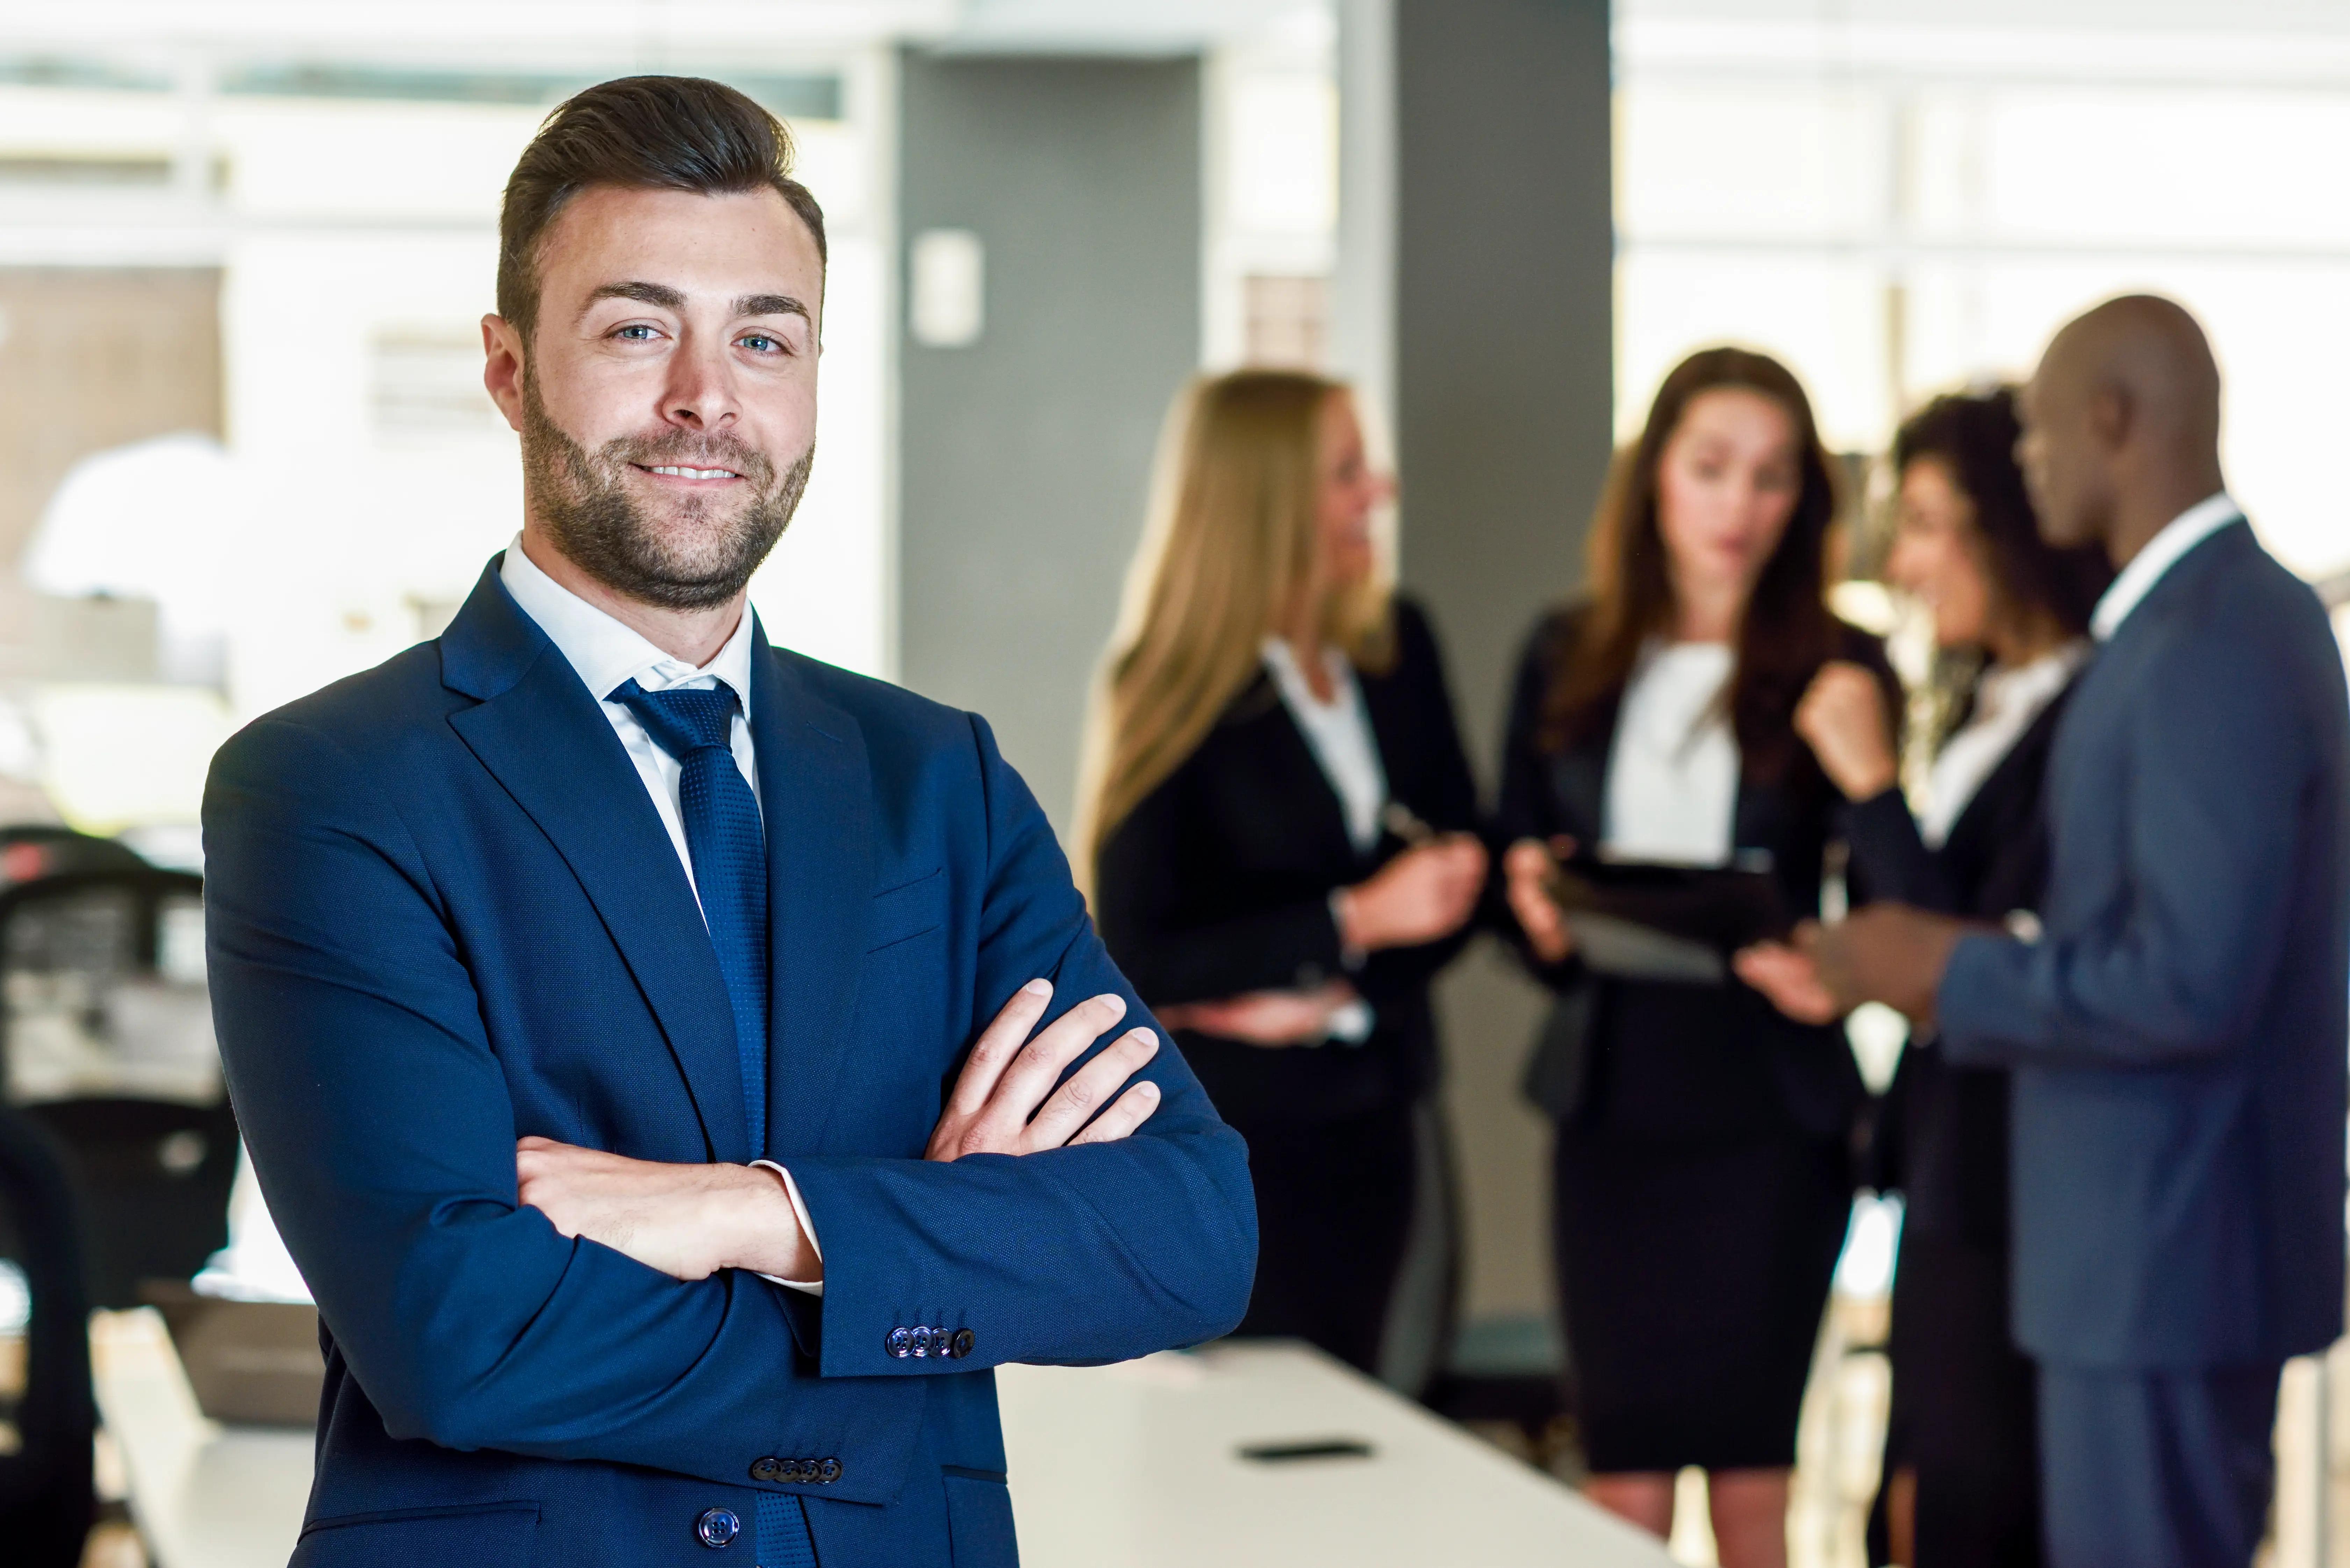 Confident businessman with crossed arms standing in the foreground, with a team of professionals discussing in the background of a modern office, representing leadership in accounting services.